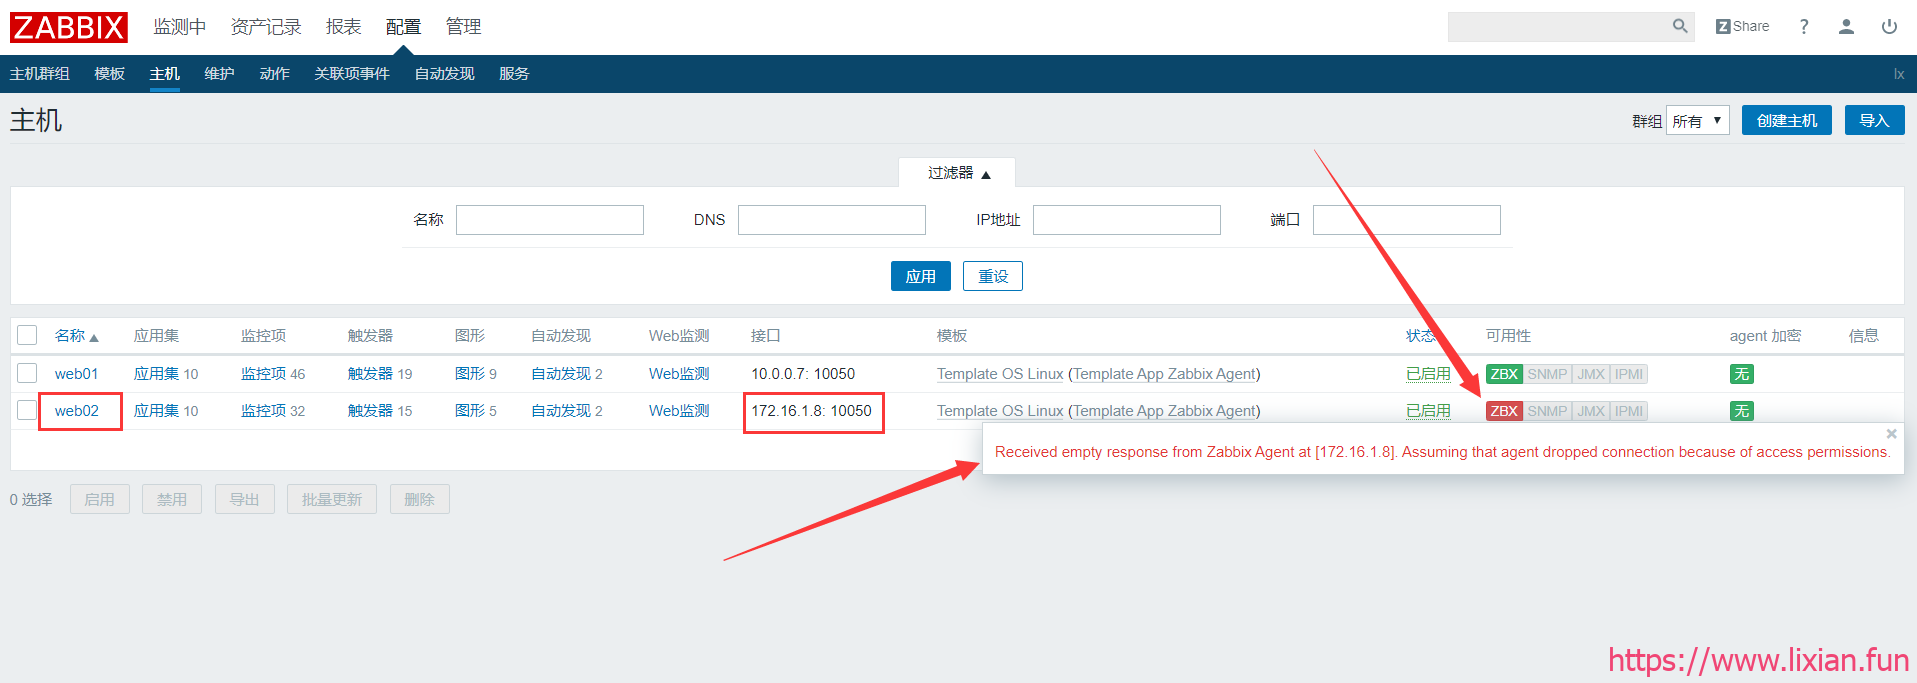 zabbix监控本机出现报红色错误Received empty response from Zabbix Agent at [172.16.1.8]. Assuming that agent dropped connection because of access permissions.【显哥出品，必为精品】